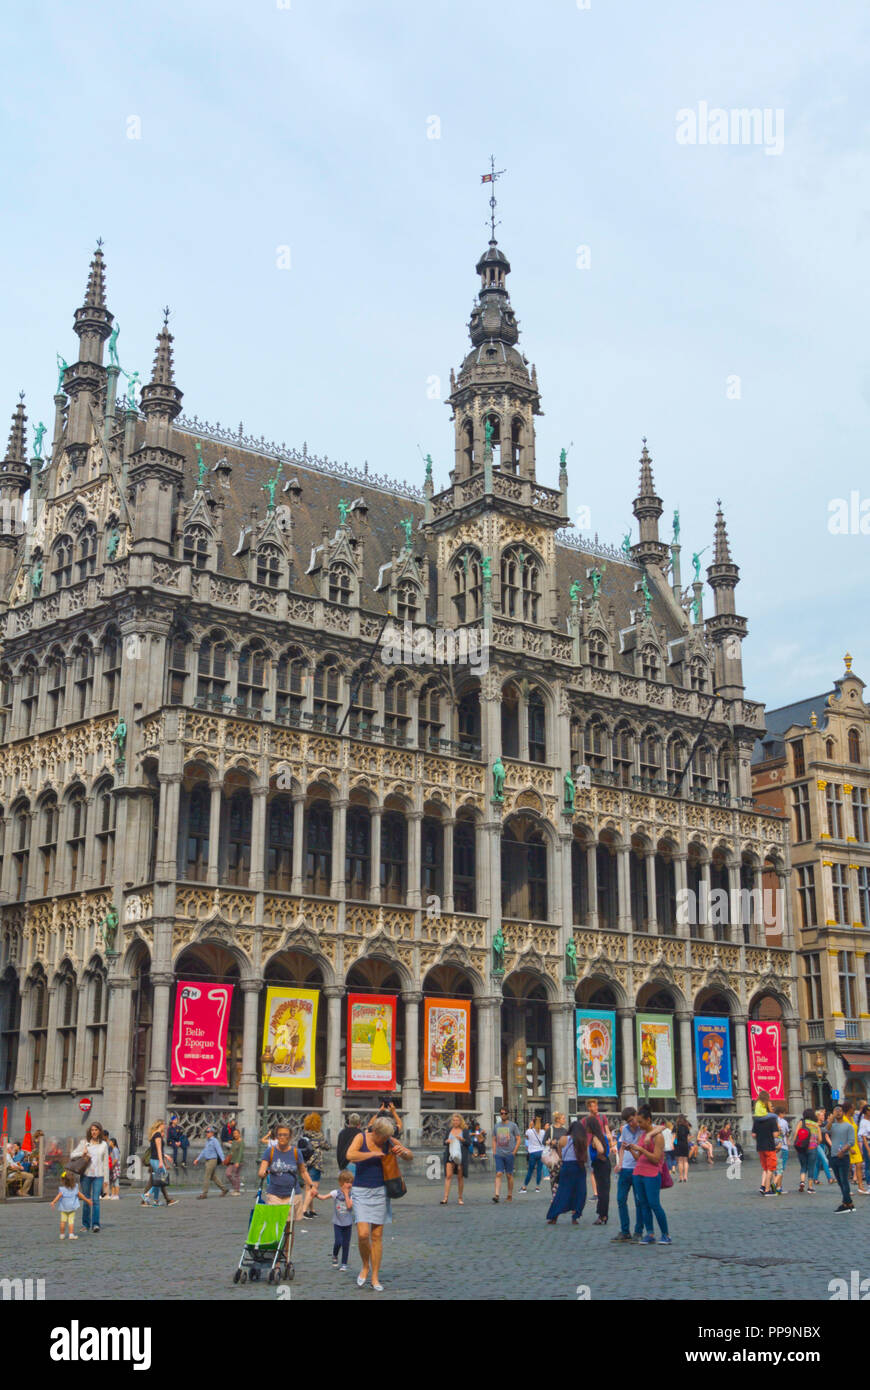 Brussels Old Town - Belgium - 05 17 2019 - Diagonal Facade Of The Mediamarkt  And Inno Shopping Mall In The Rue Neuve, The Main Shopping Street Stock  Photo, Picture and Royalty Free Image. Image 183093290.